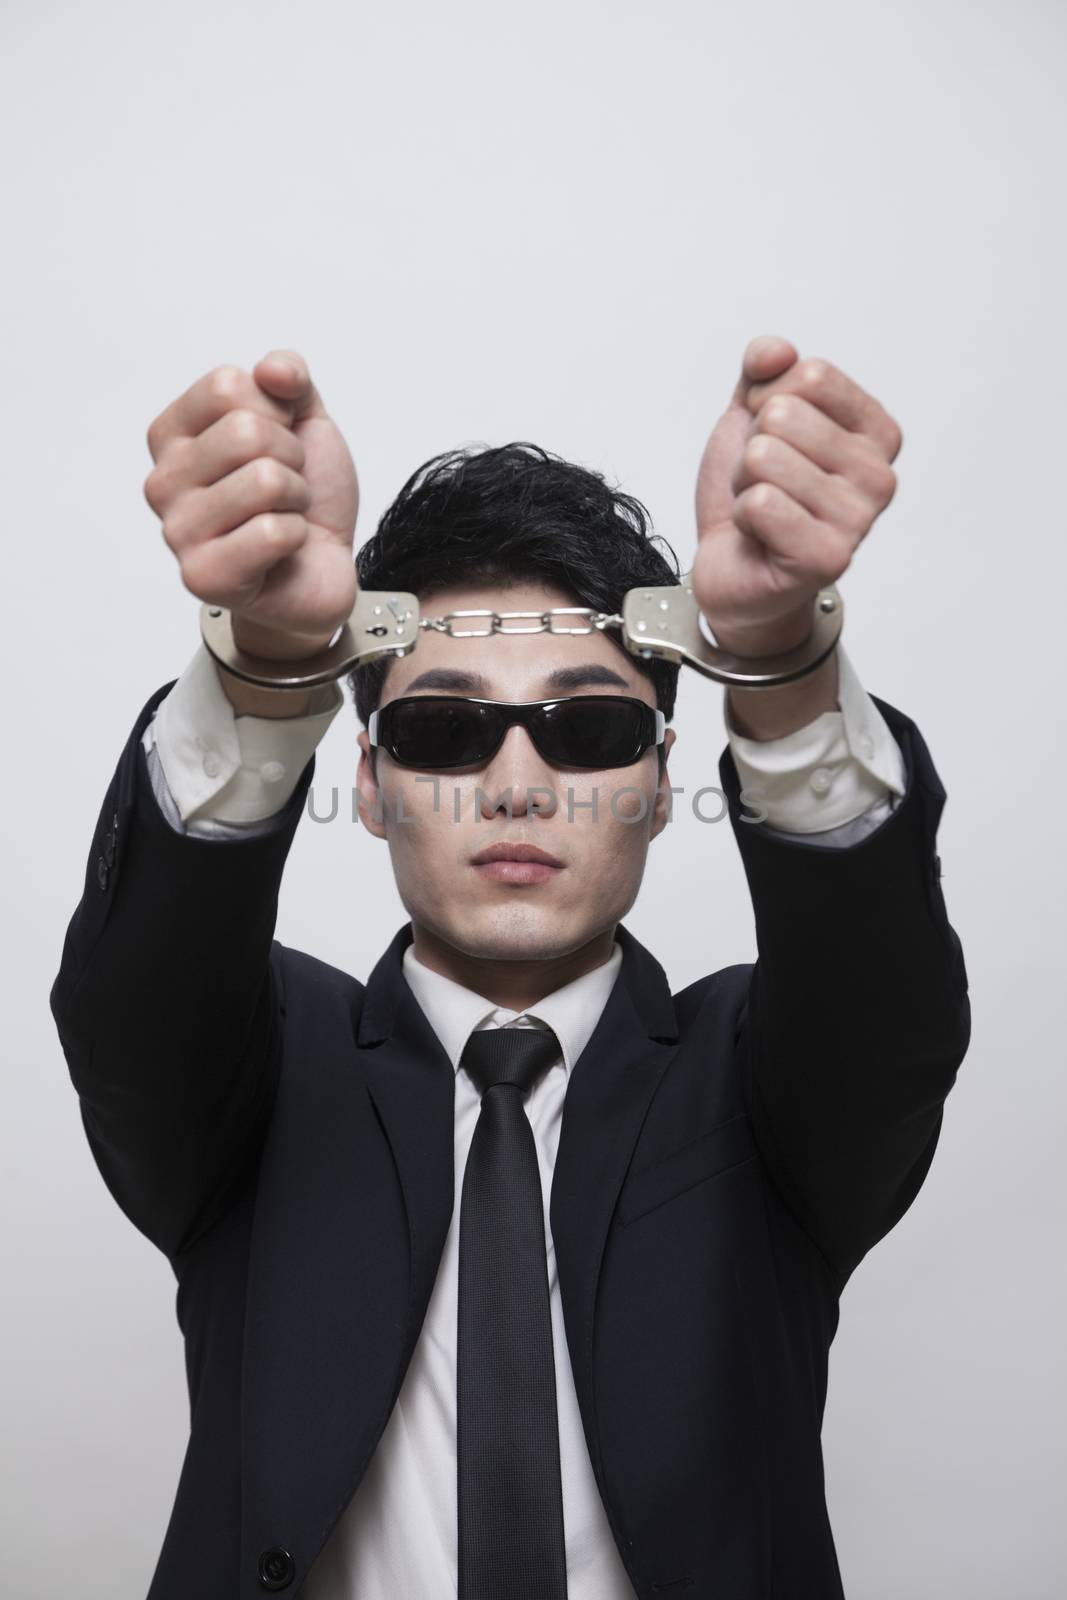 Cool businessman with sunglasses in handcuffs, studio shot